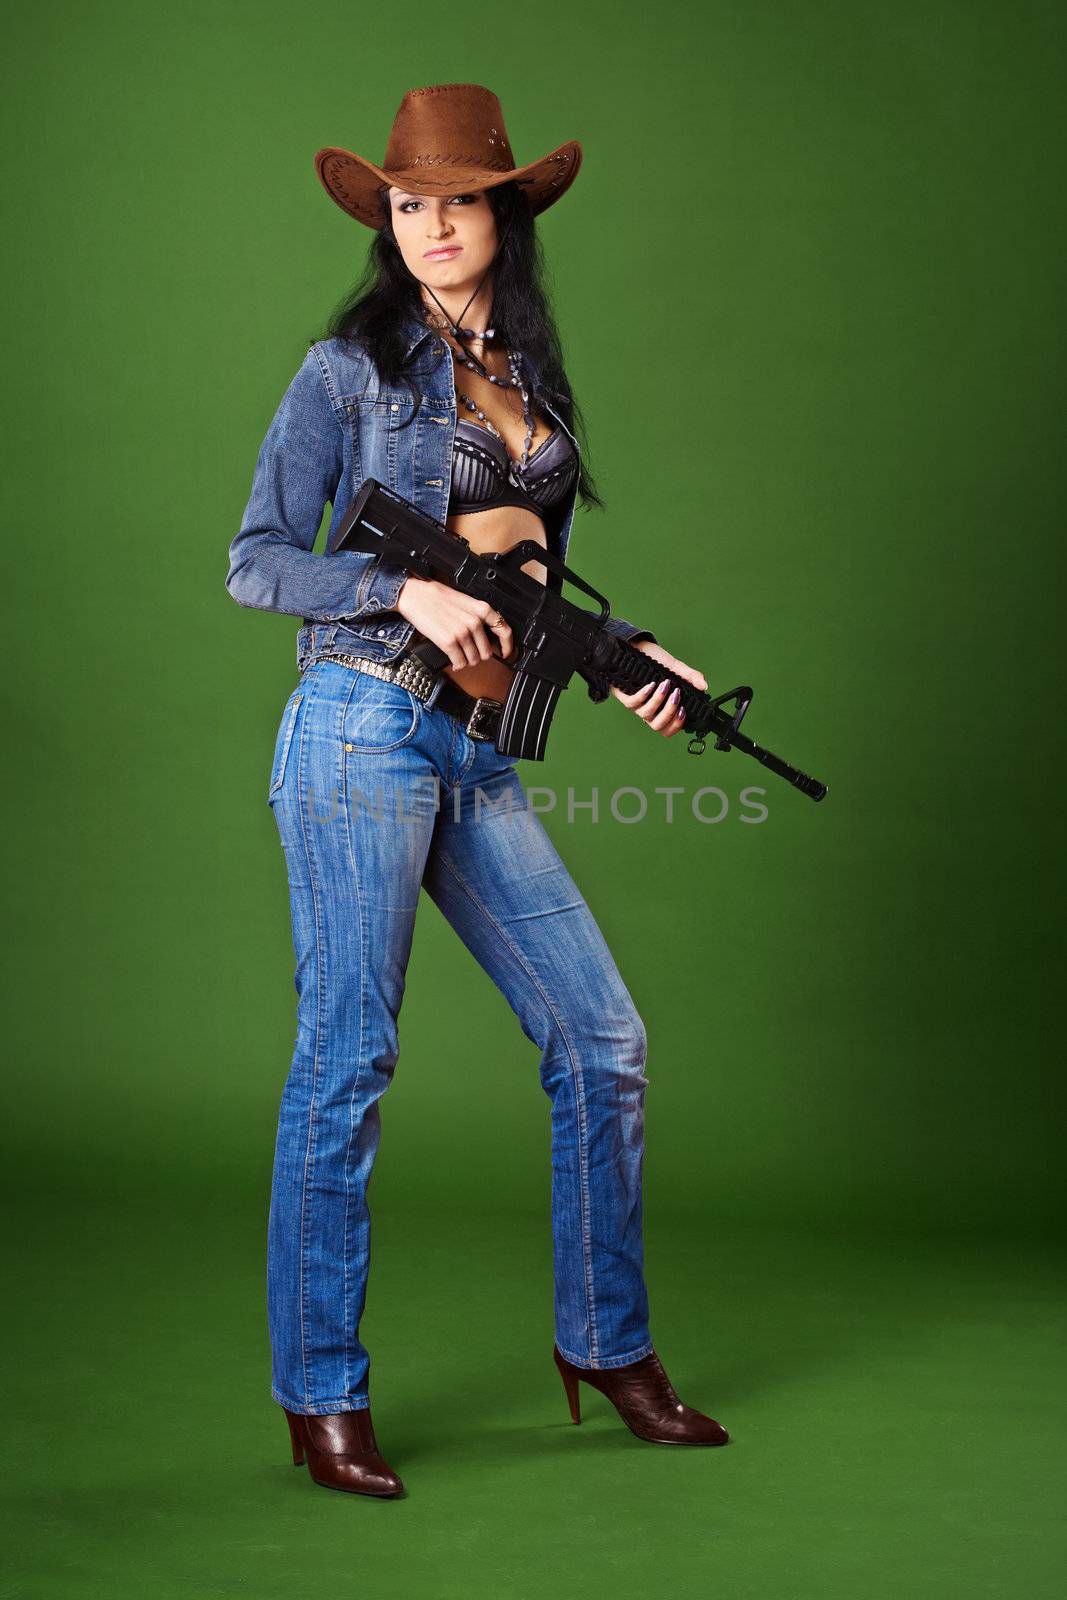 Young beautiful woman in jeans with a rifle on a green background